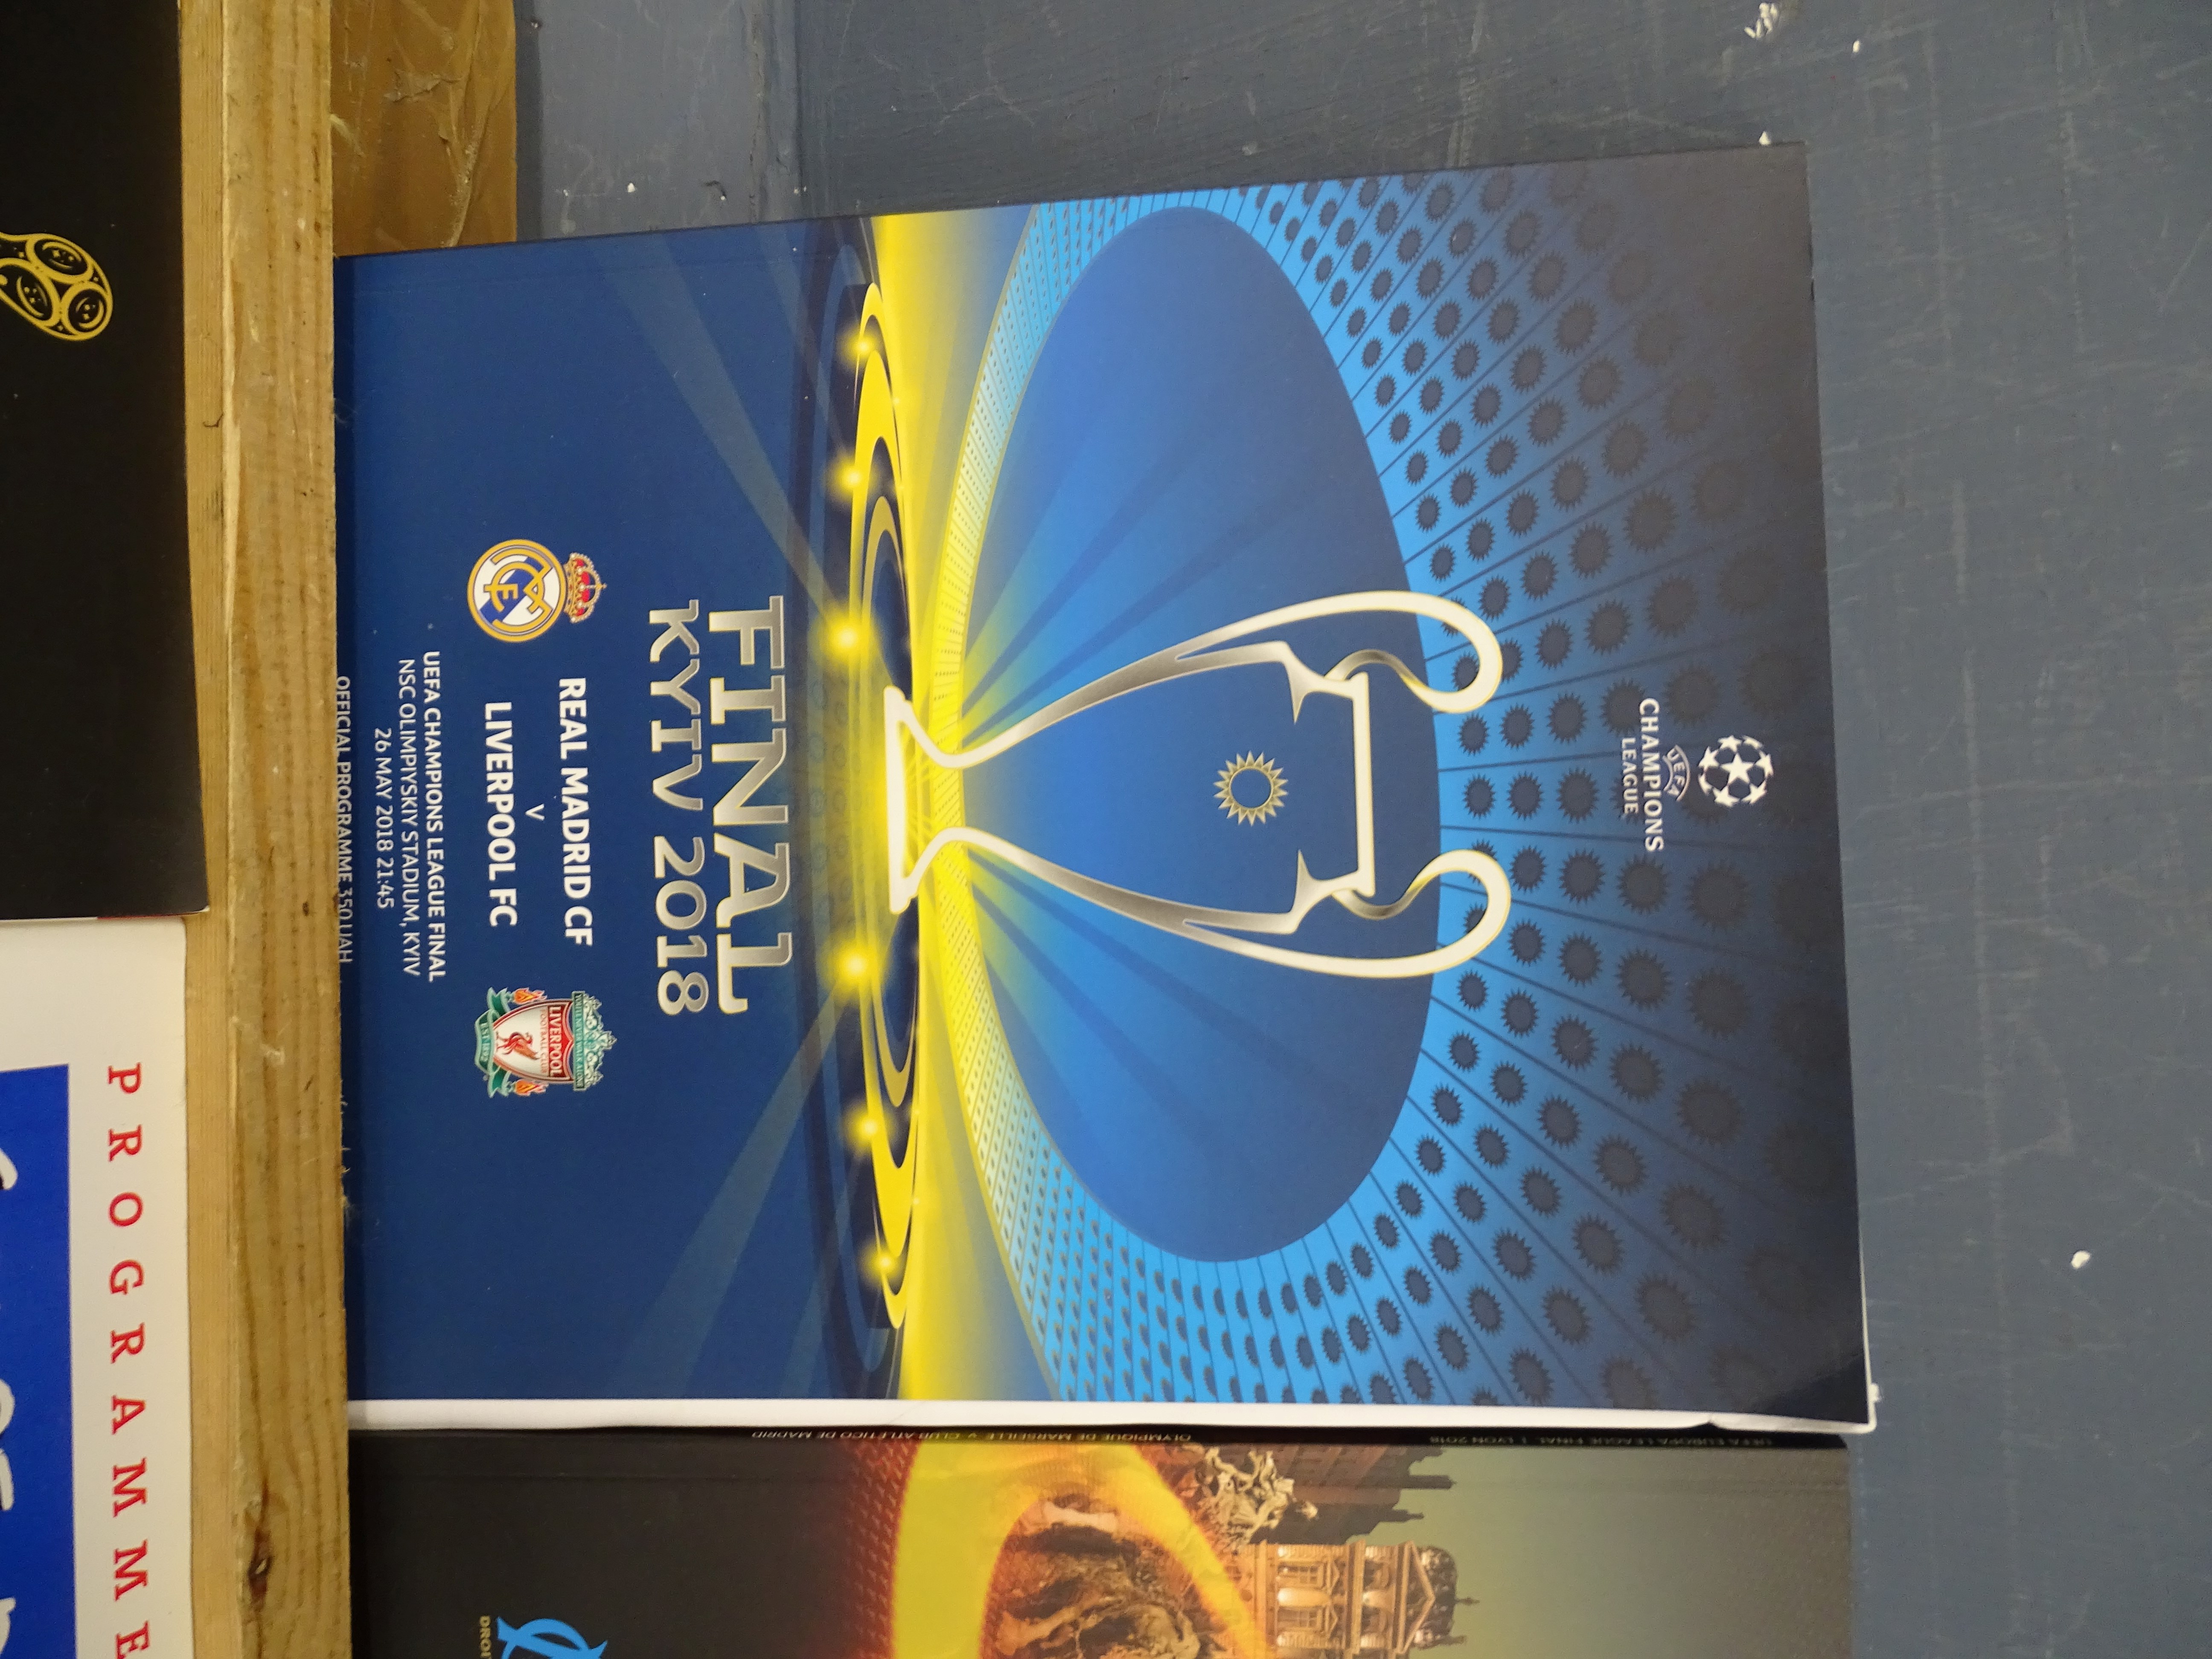 5 Football programs to include World Cup France 98 and UEFA Champions League final etc - Image 2 of 6